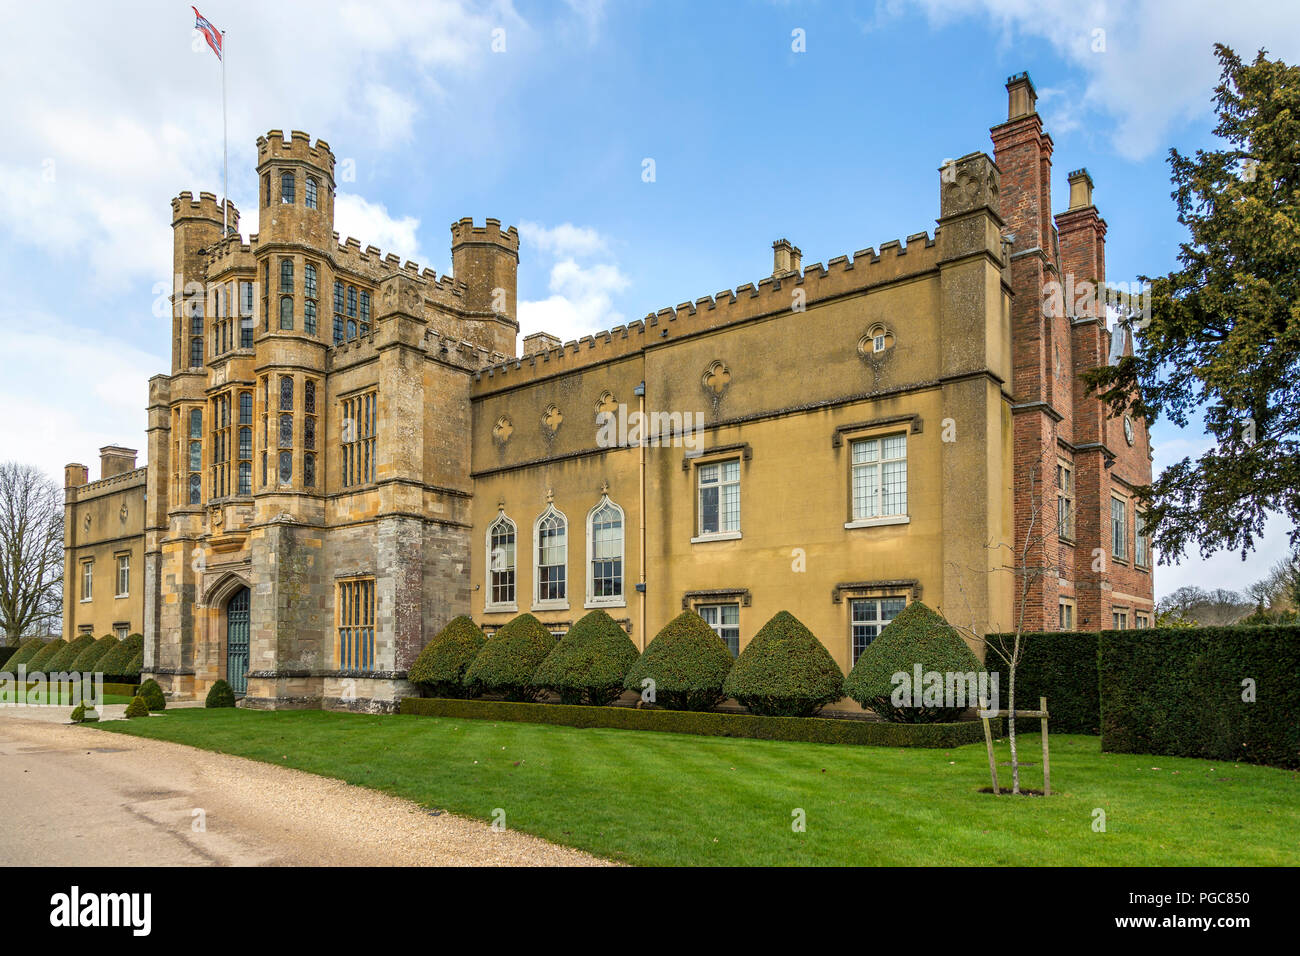 Views of the famous Coughton Court near Alcester, Warwickshire. Stock Photo